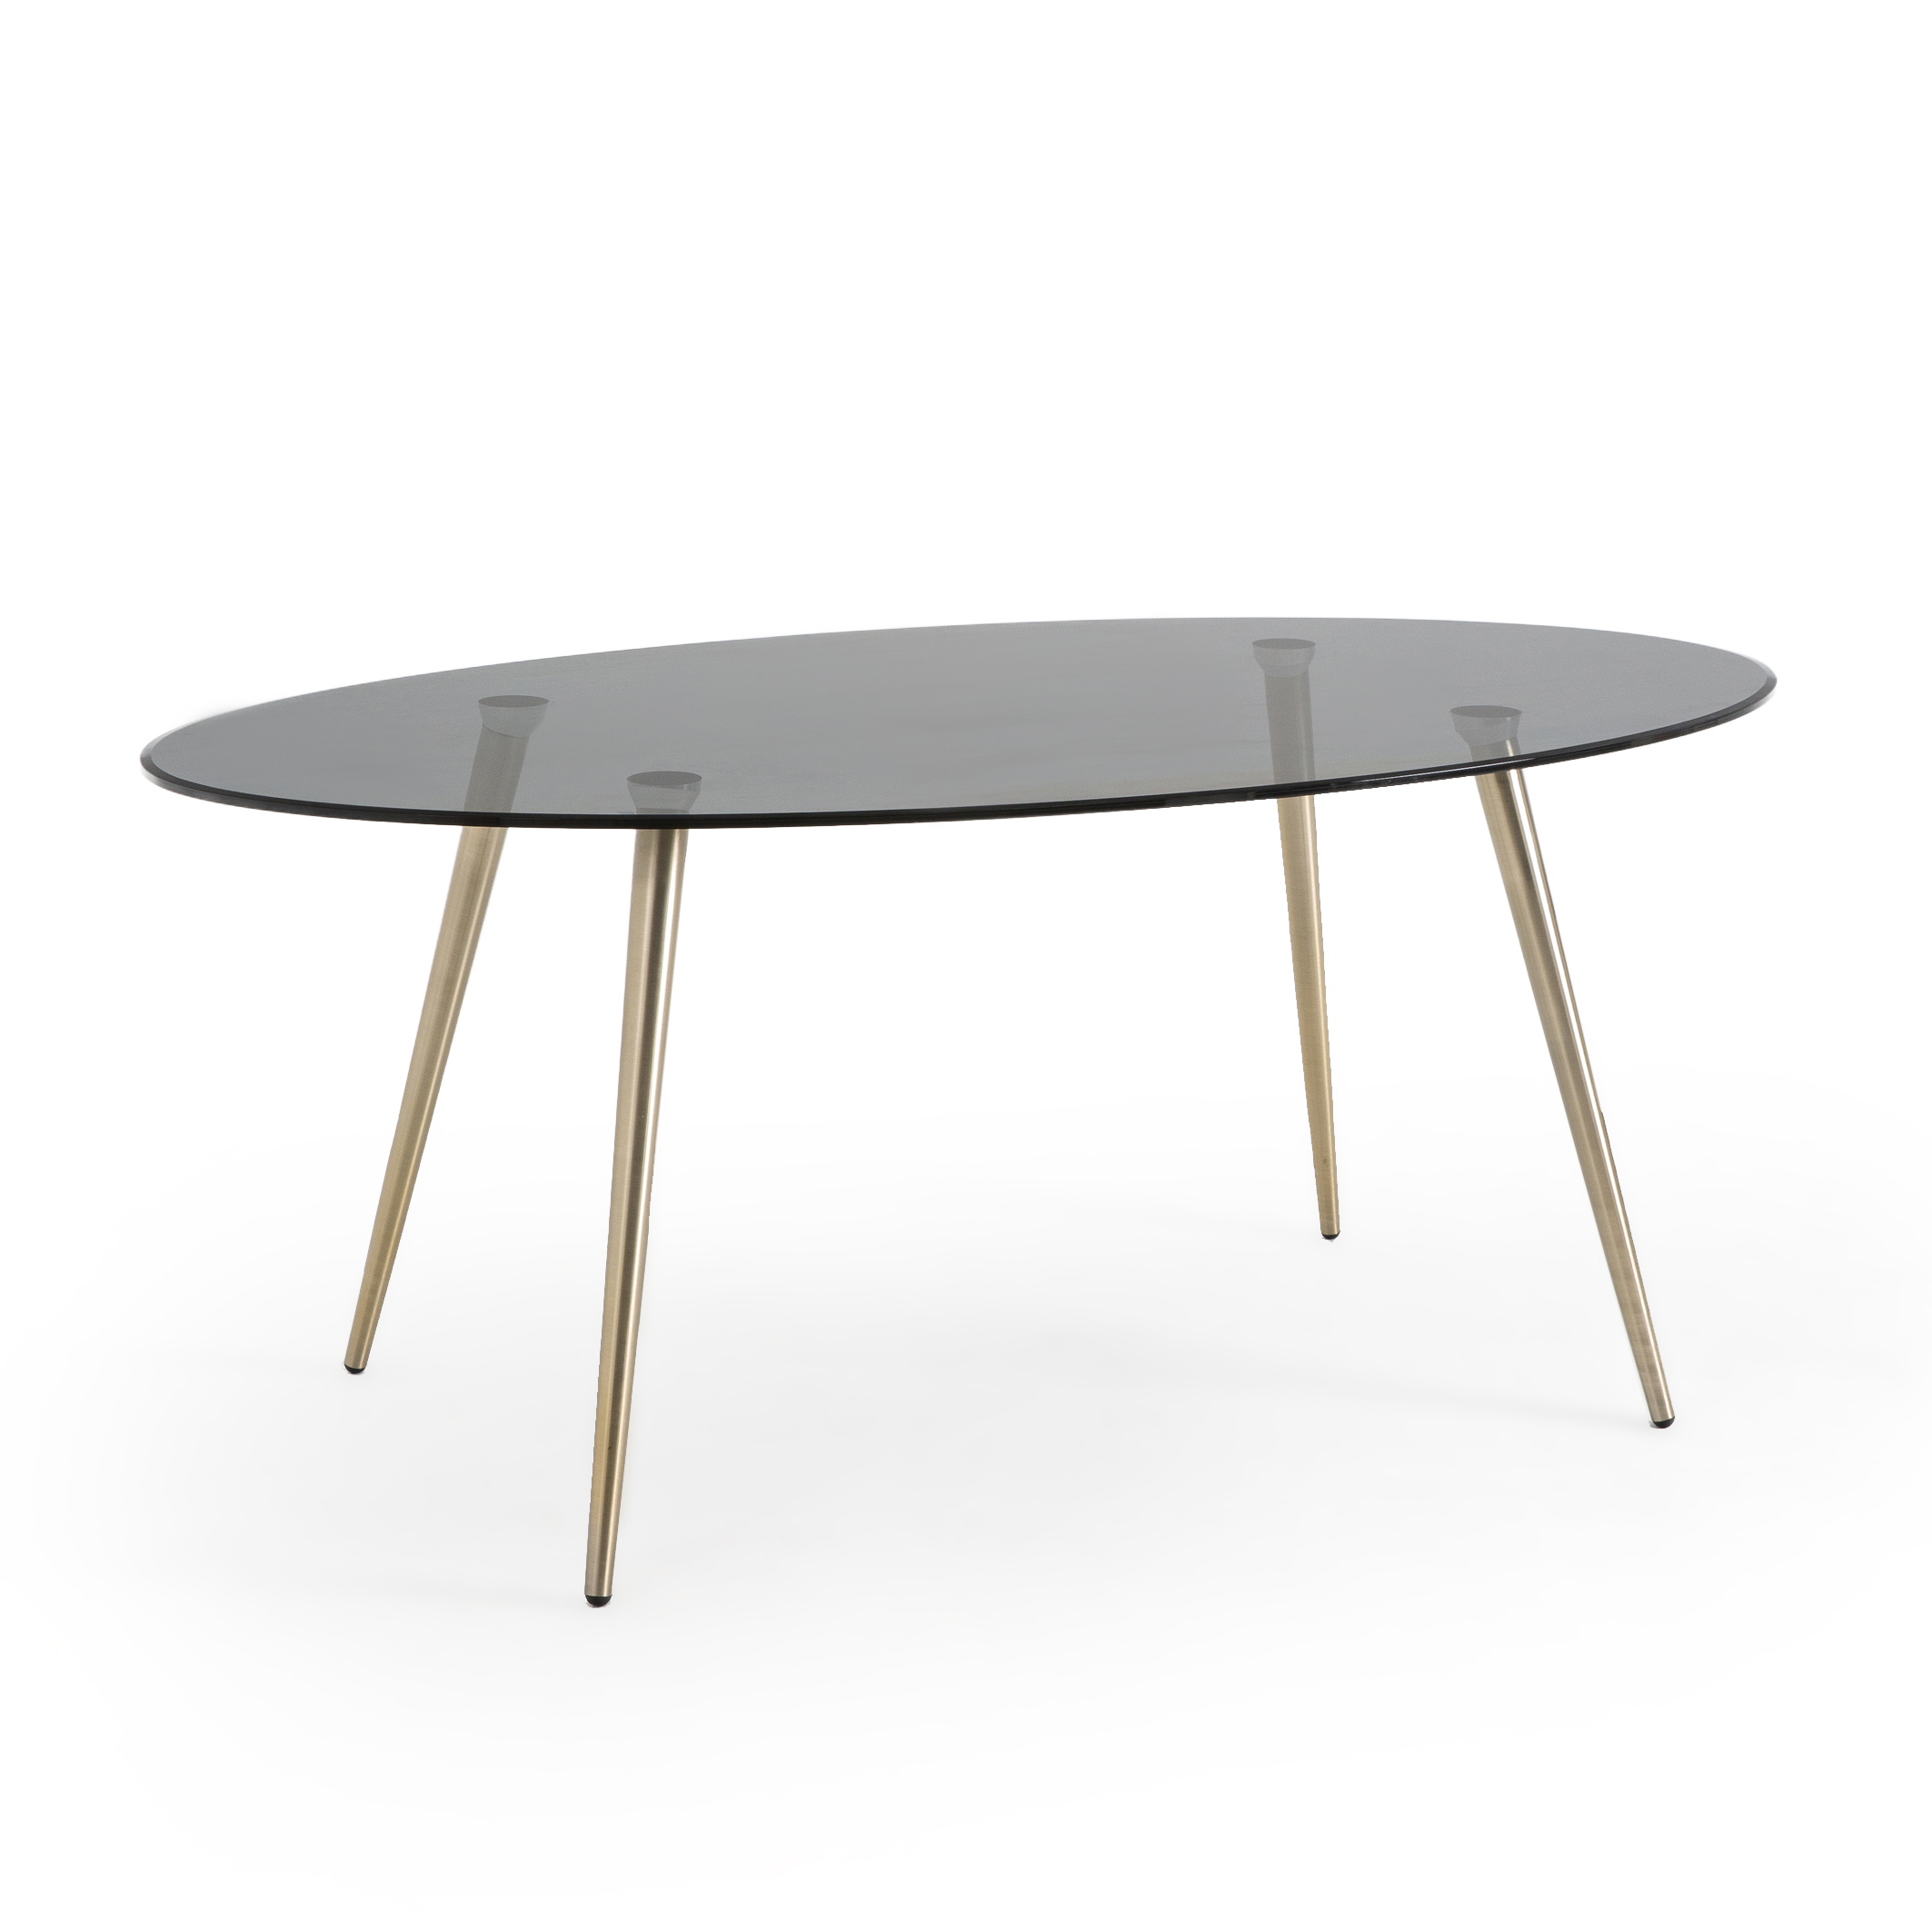 Topim Oval Dining Table Seats 6 8, How Long Is A Table That Seats 6